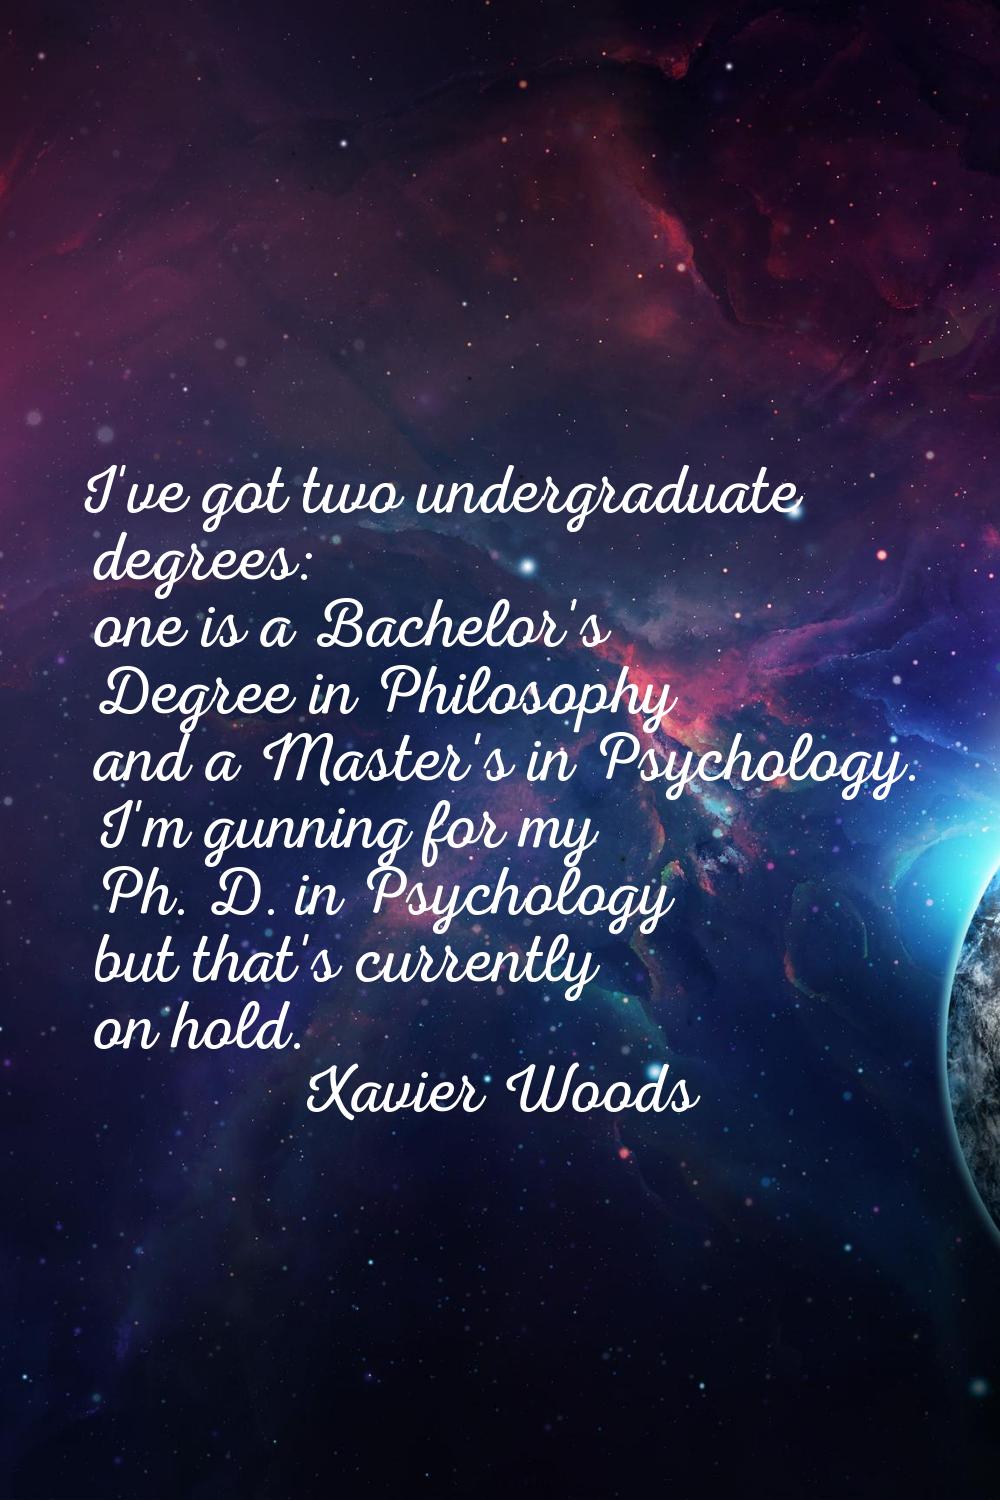 I've got two undergraduate degrees: one is a Bachelor's Degree in Philosophy and a Master's in Psyc